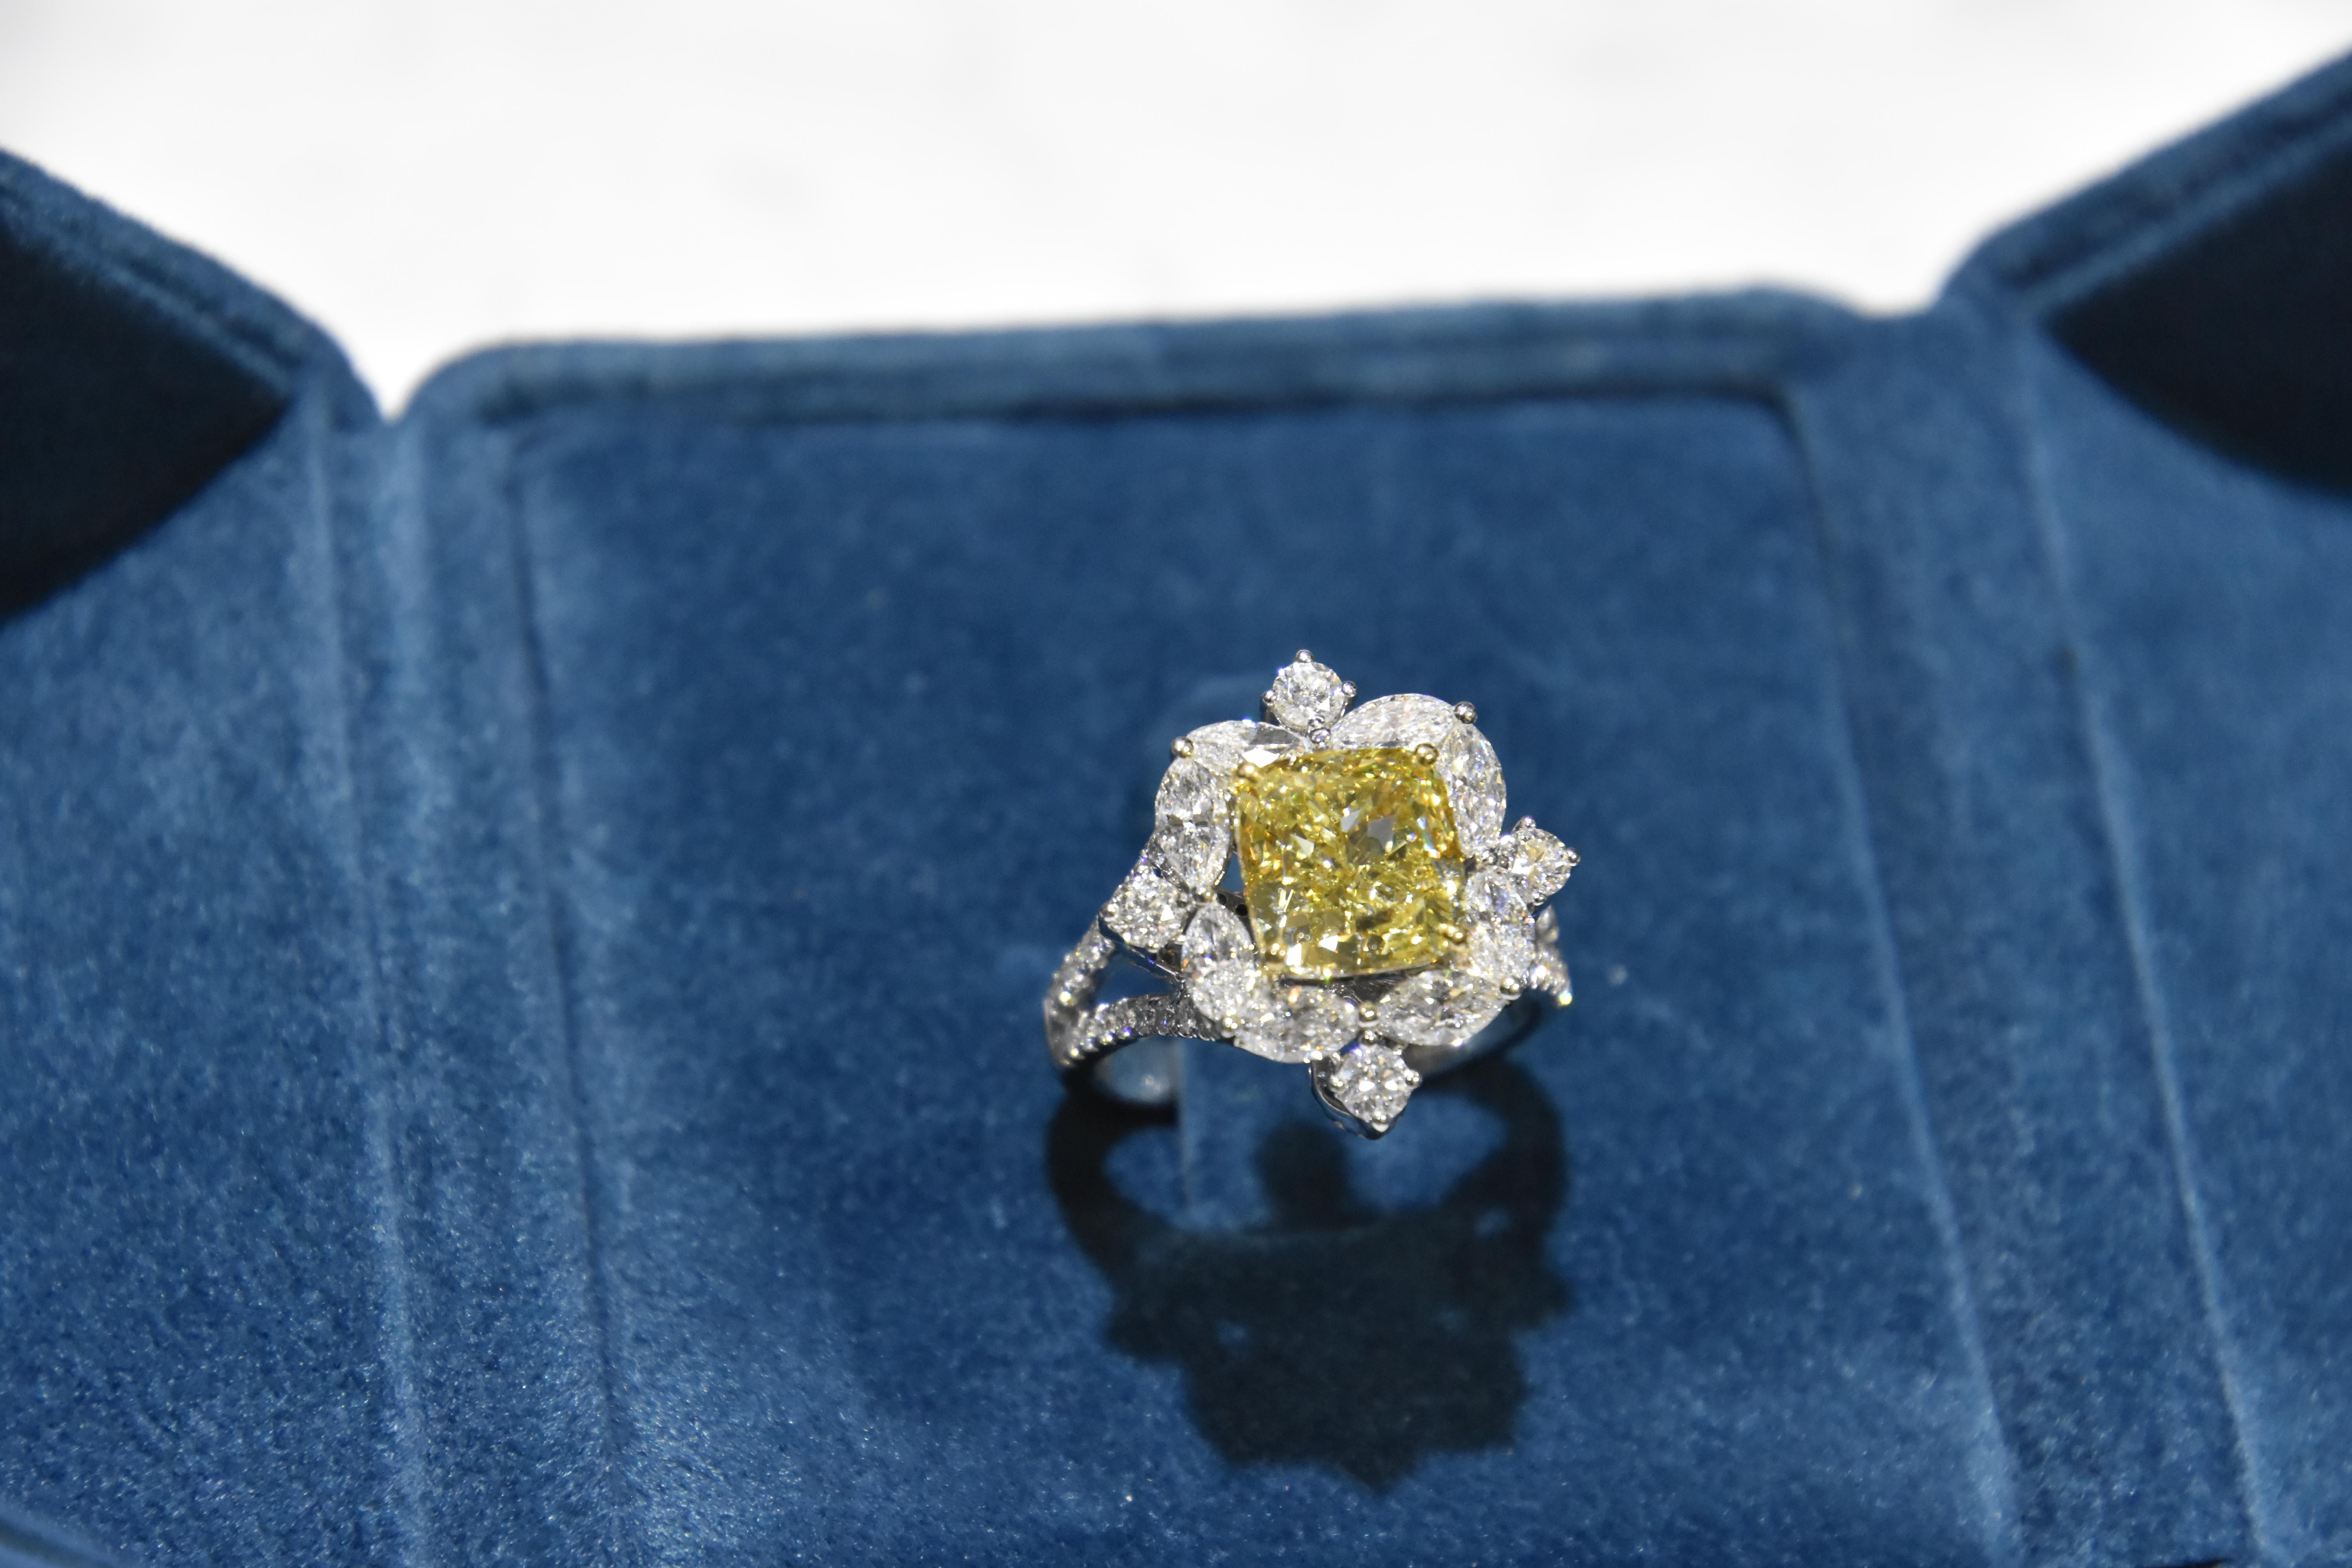 Contemporary classic designed ring featuring a 4.01 carat cushion cut Fancy greenish yellow diamond ring with D-F vvs- vs quality white diamond finished in white gold. 

Center stone certified by world wide known GIA institution. (6175835324)
Ring